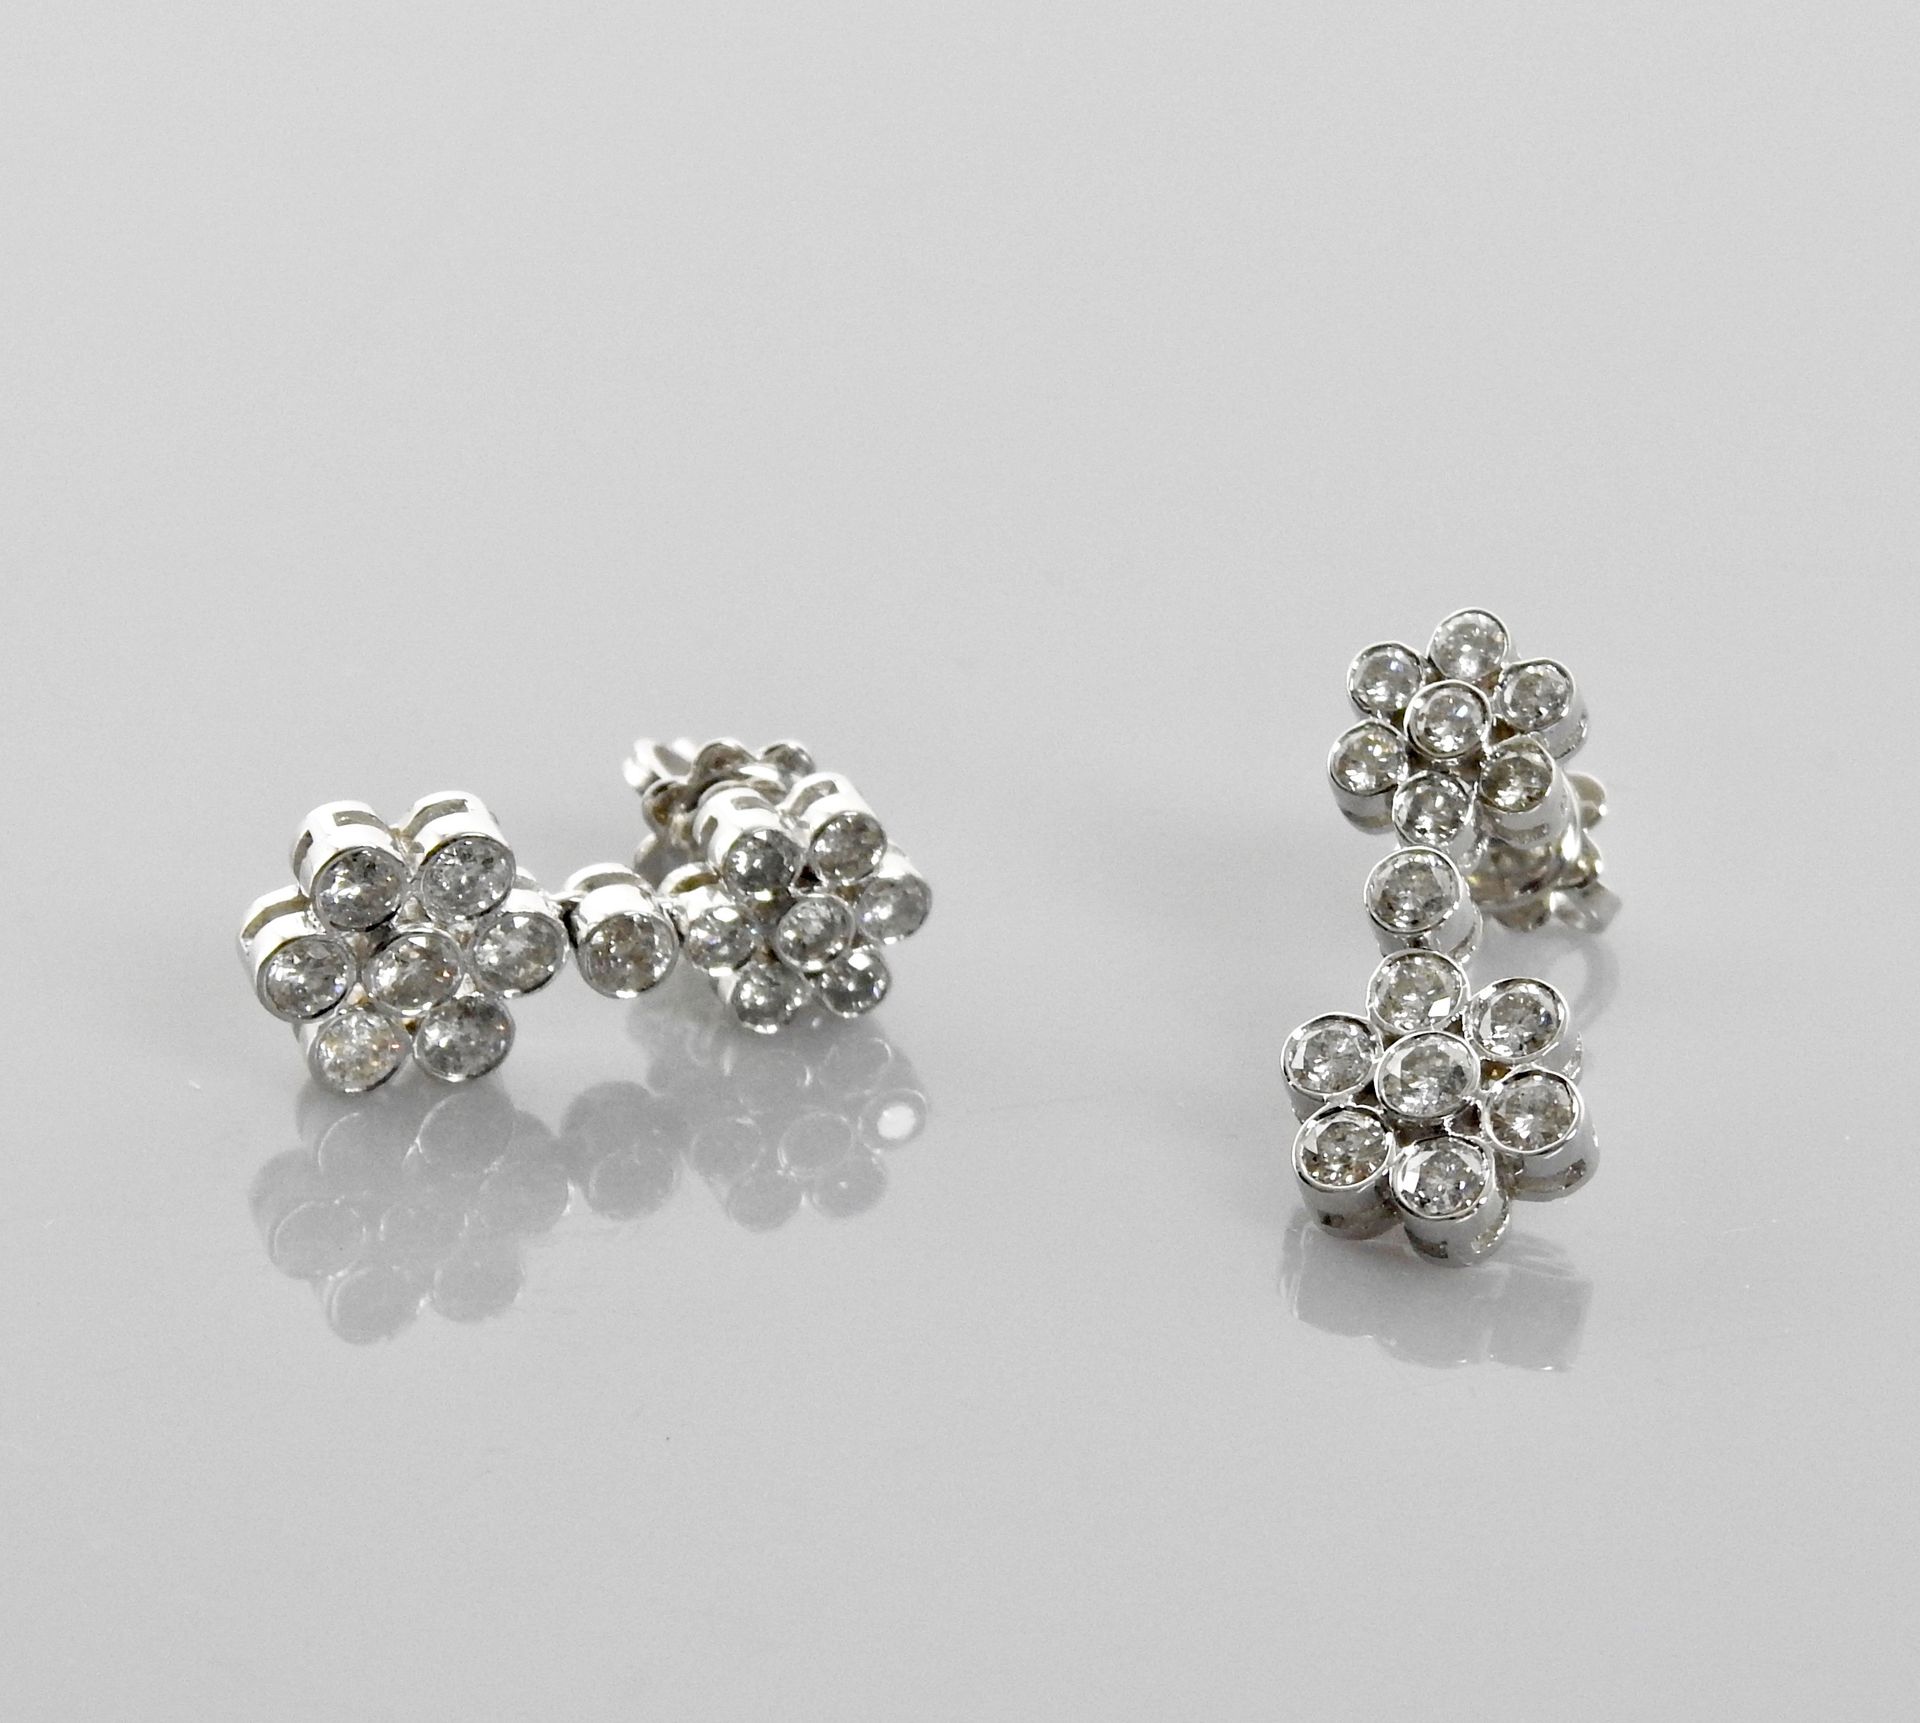 Null Earrings in white gold, 750 MM, each drawing two flowers covered with diamo&hellip;